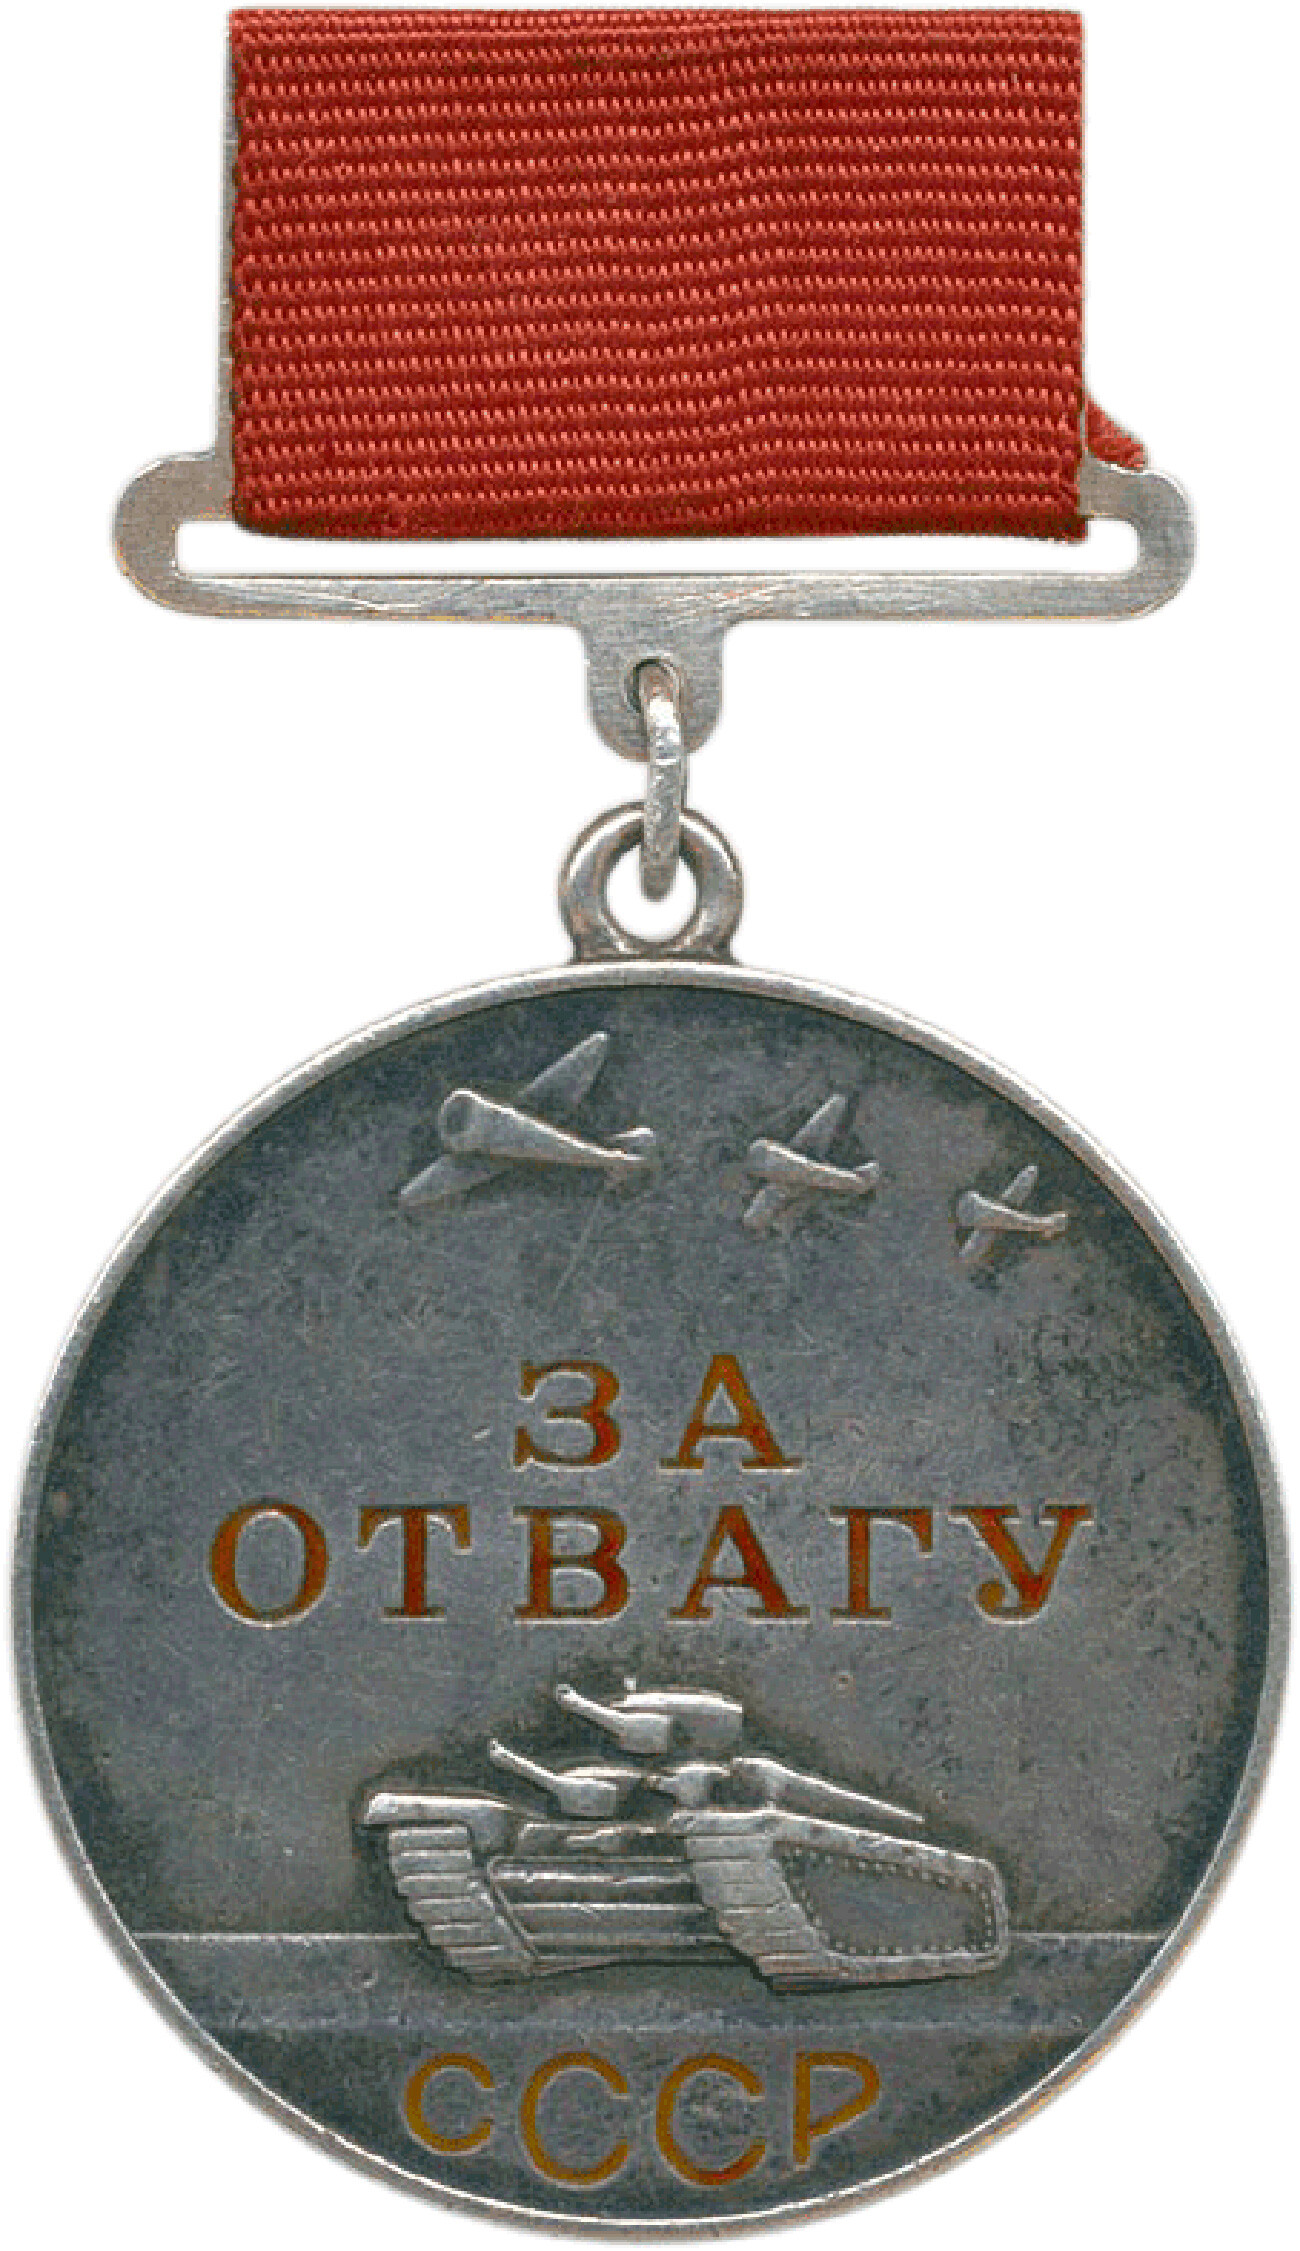 ‘For Courage’ medal.